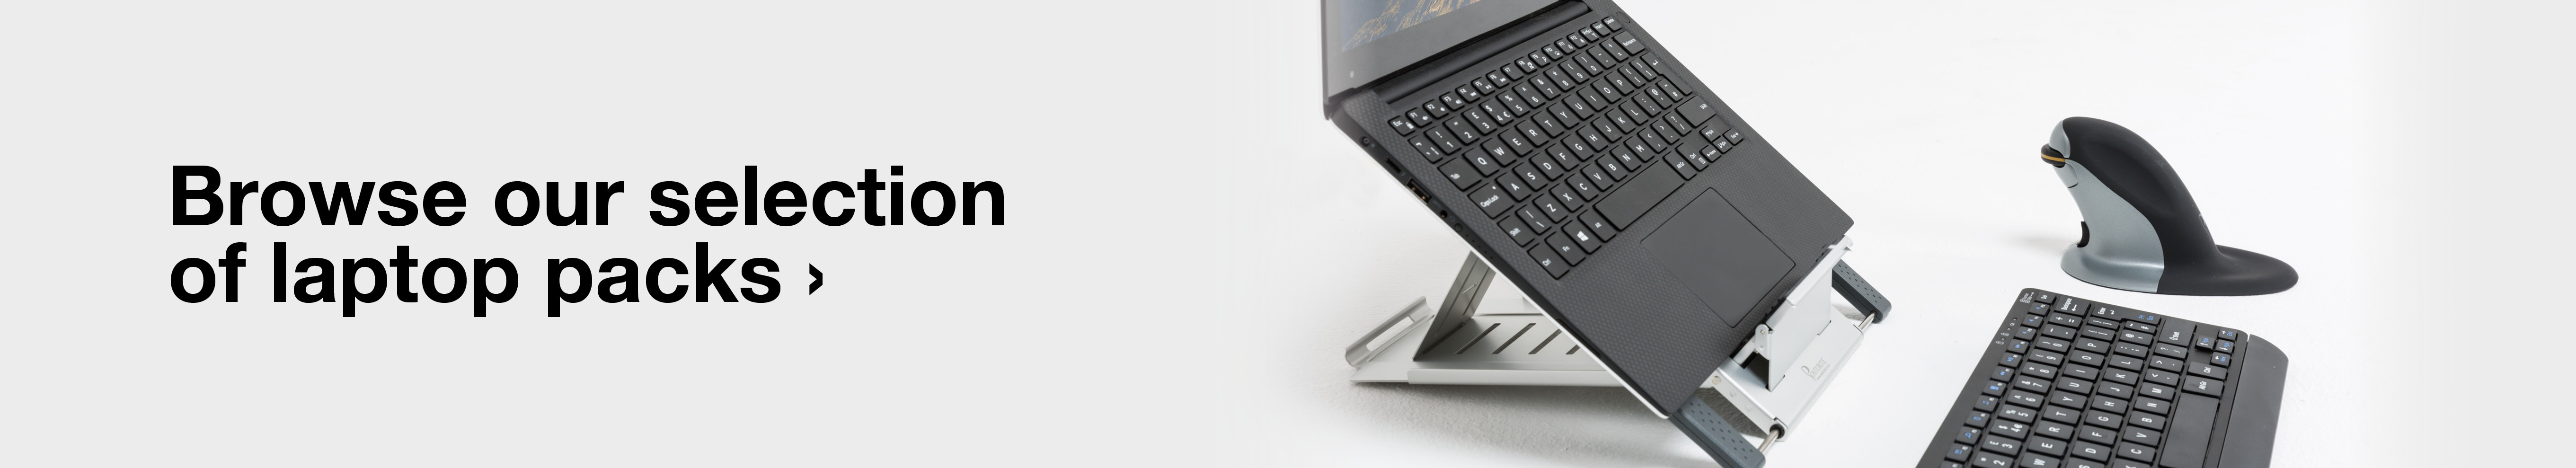 Browse our selection of laptop packs, which all include a stand, mouse and keyboard